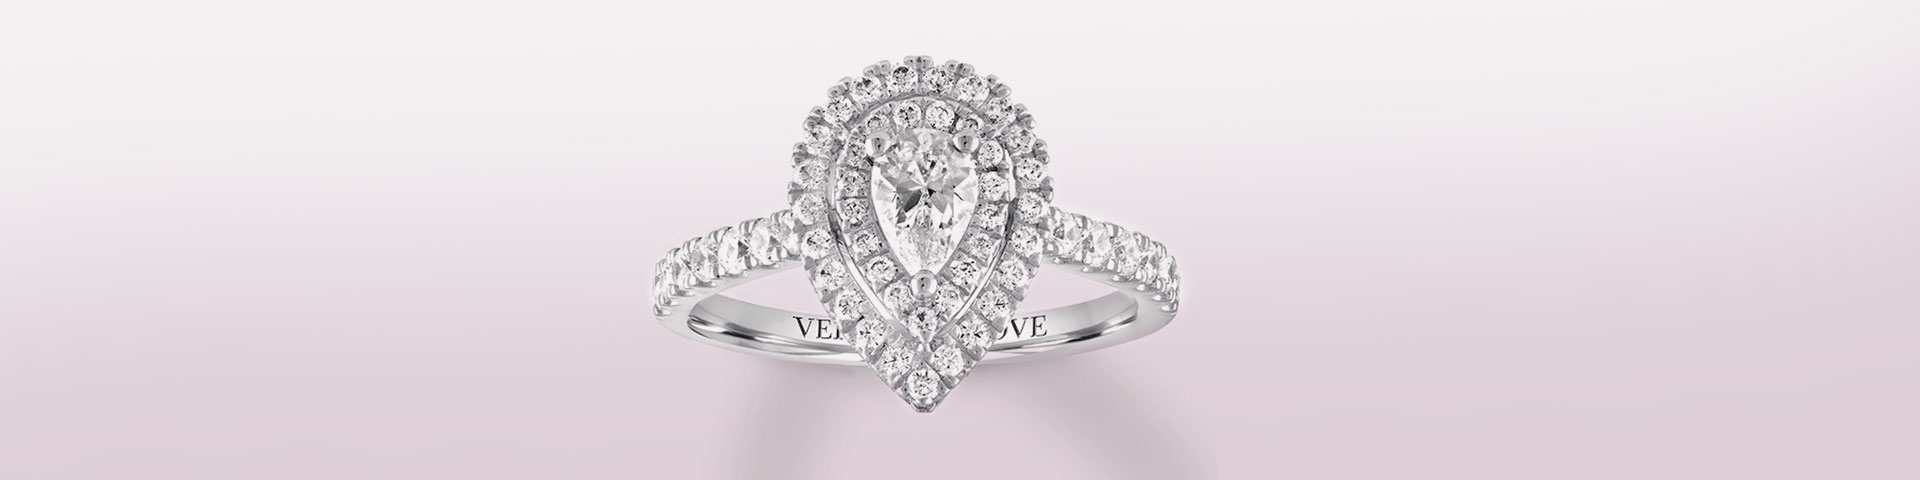 White gold and diamond engagement ring with pear-shaped center stone and round diamond halo.